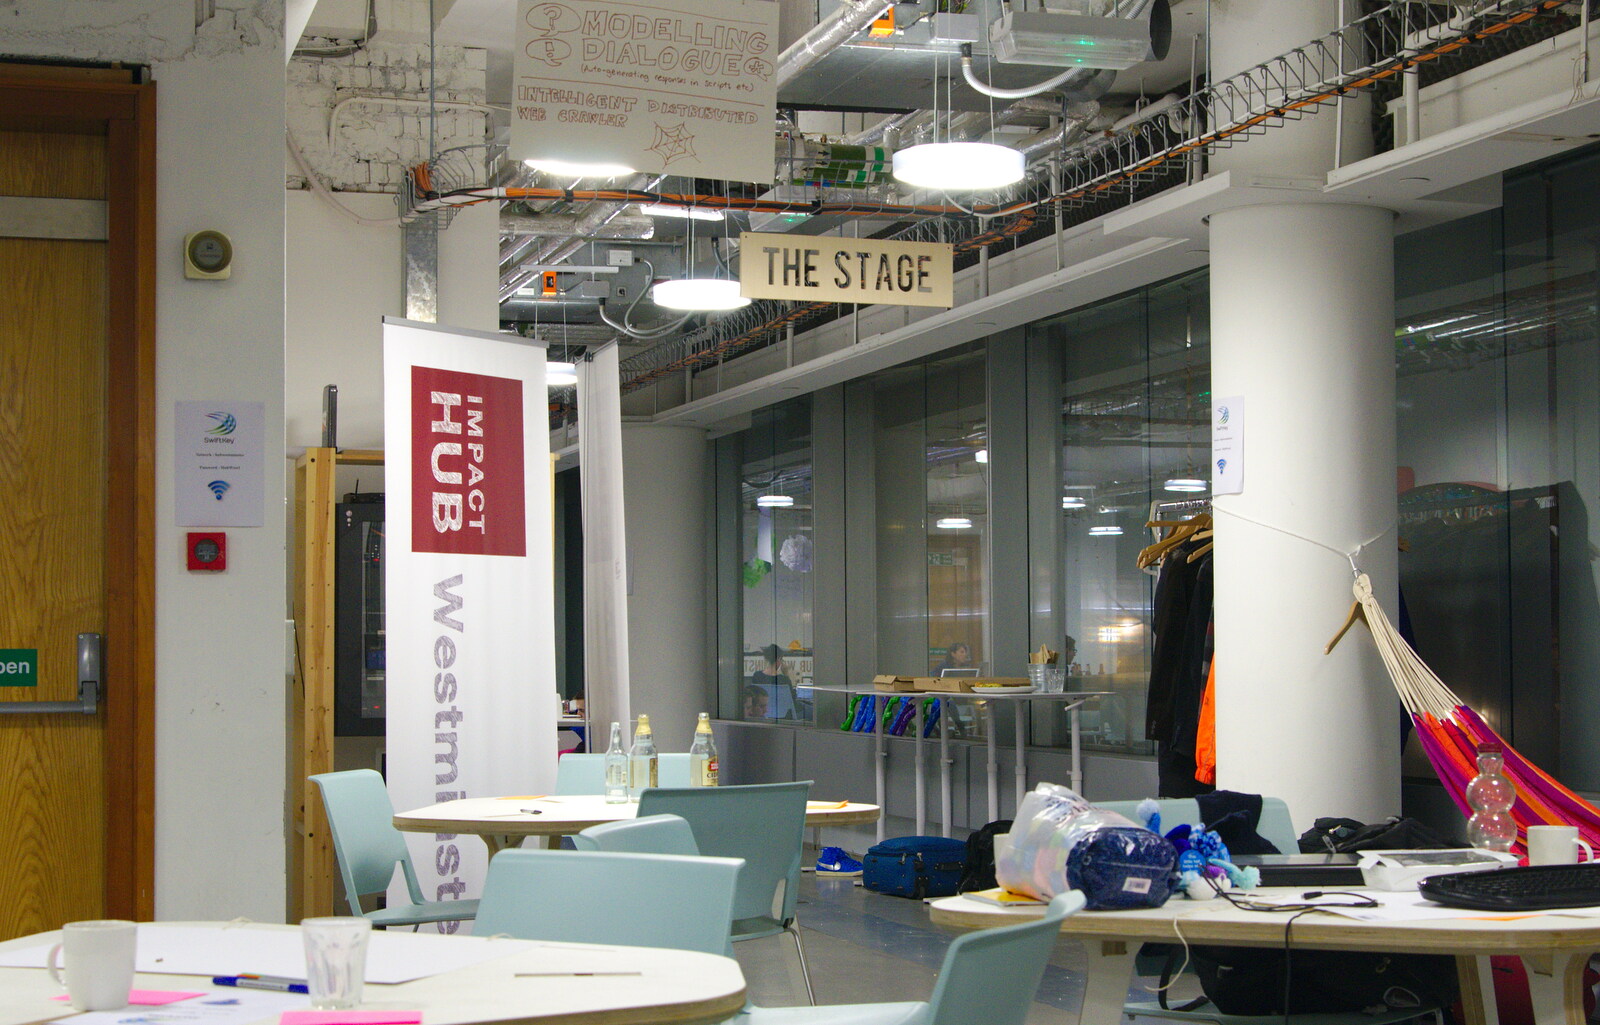 The Hub is quiet at night from SwiftKey Innovation, The Hub, Westminster, London - 21st February 2014